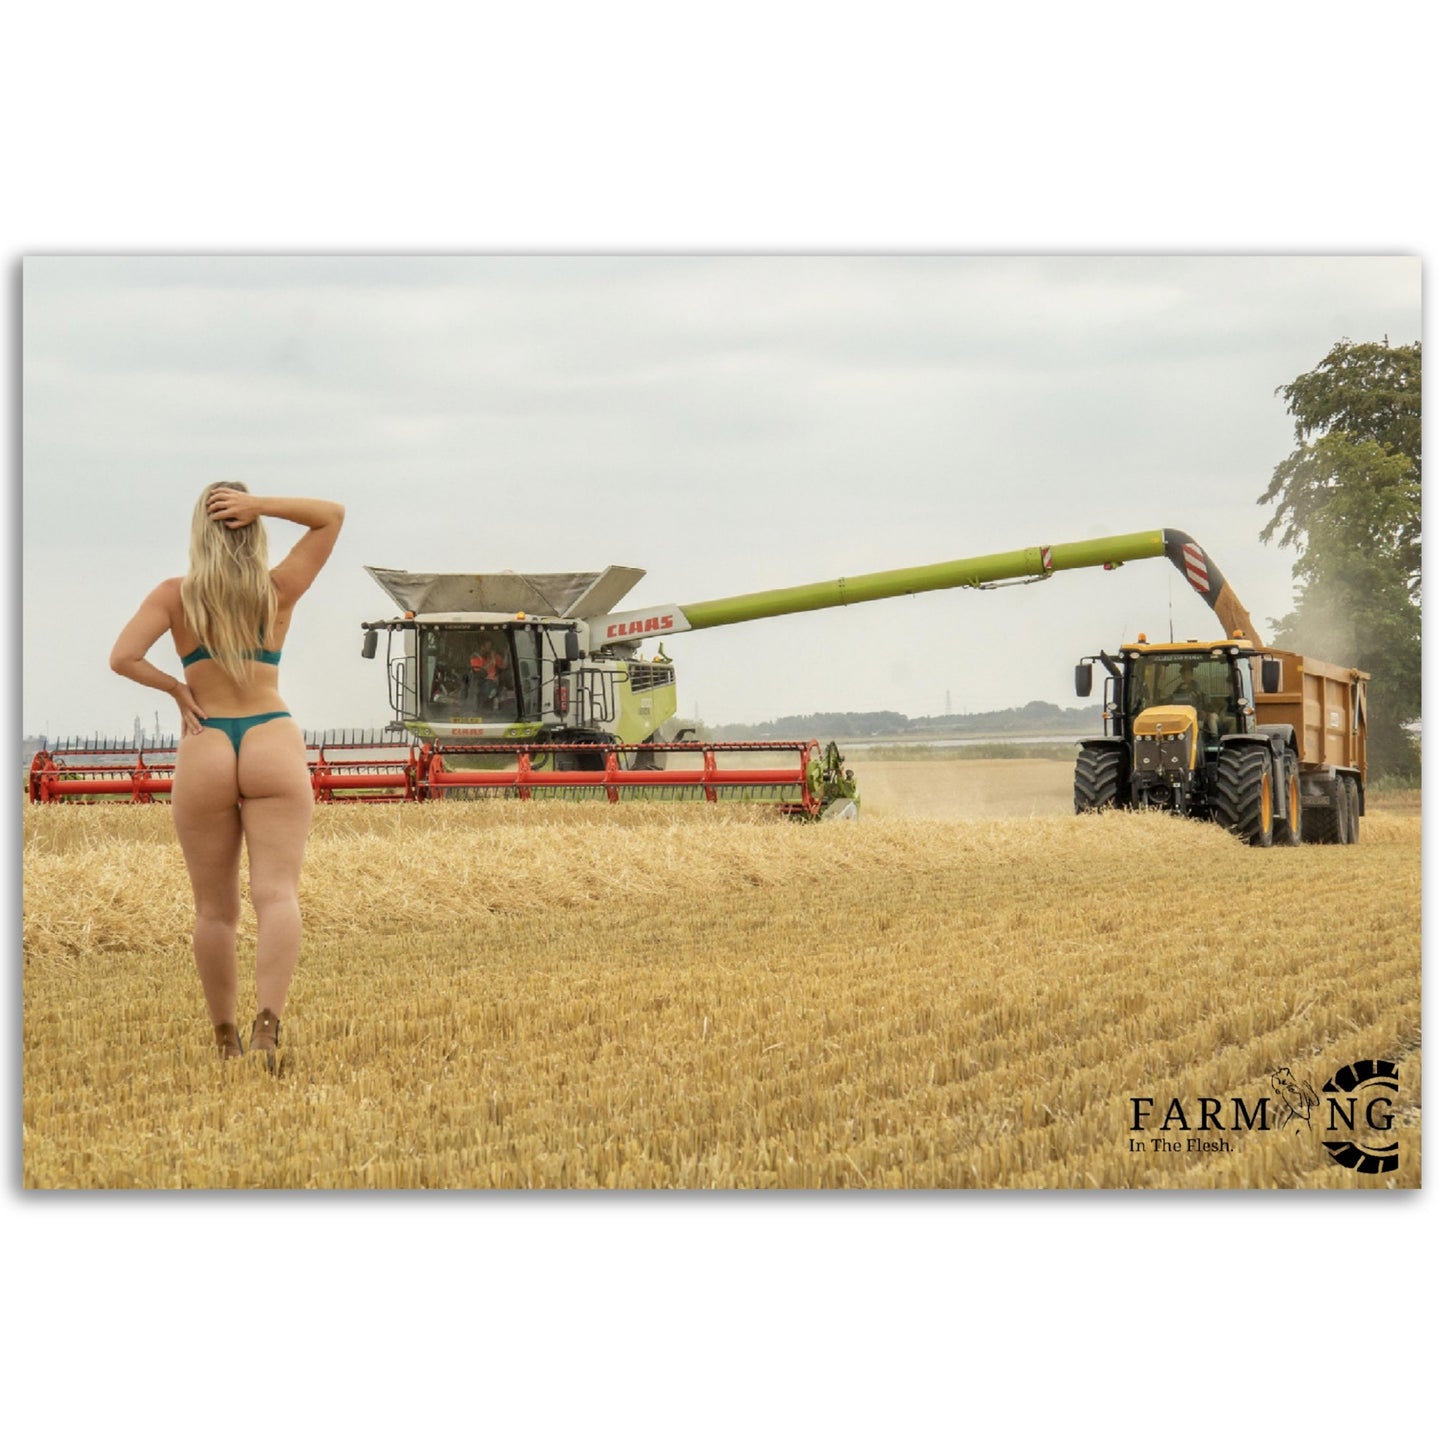 Olly Blogs X Farming In The Flesh Poster